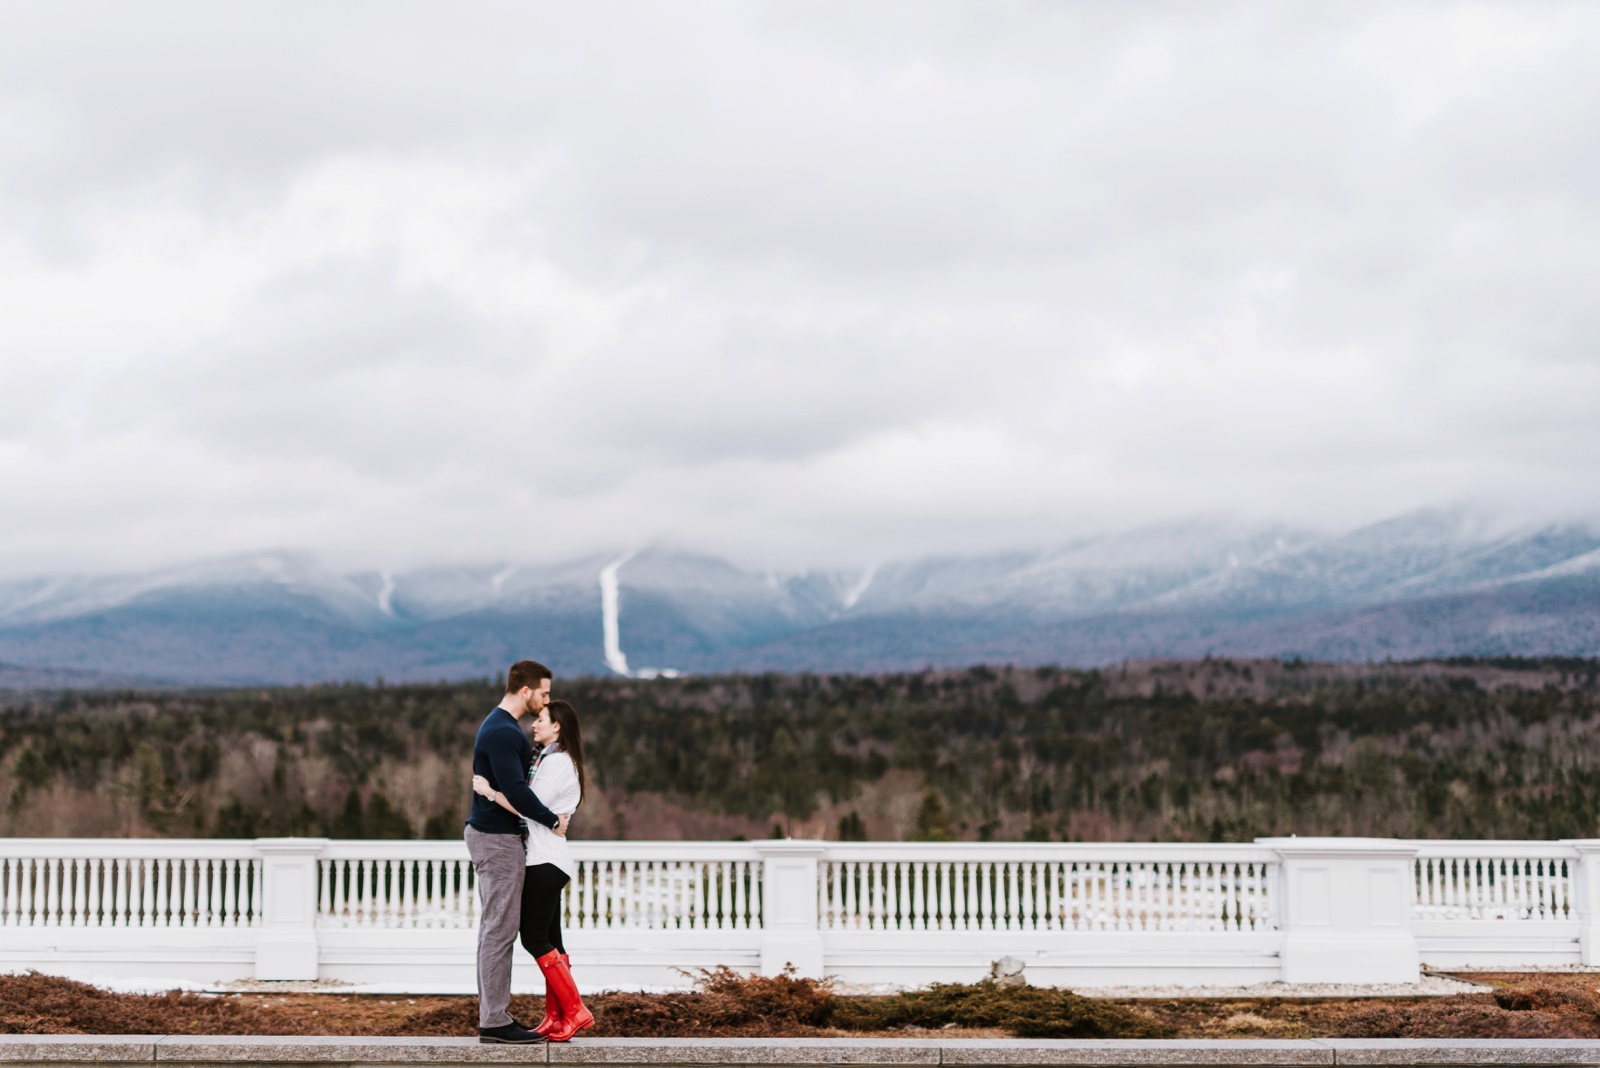 Winter Engagement Session at Omni Mount Washington Resort in Bretton Woods, NH by Boston Wedding Photographer Annmarie Swift